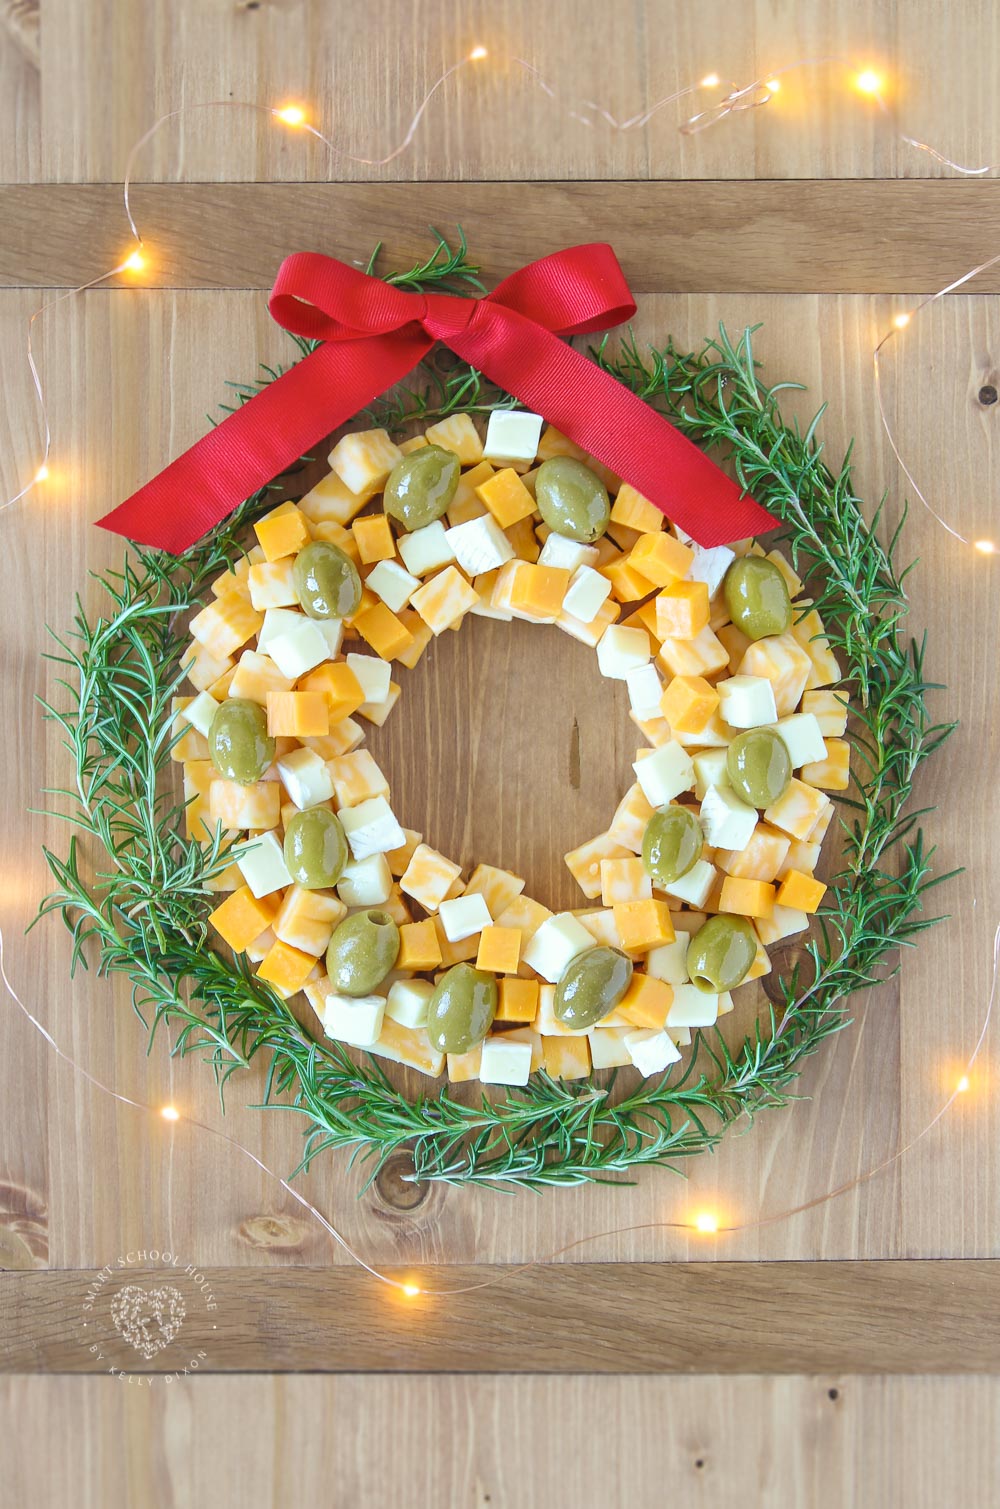 How to Make a Cheese Wreath - Use this one easy trick for making a perfect cheese wreath! #CheeseWreath #CheeseAppetizer #ChristmasAppetizerIdea